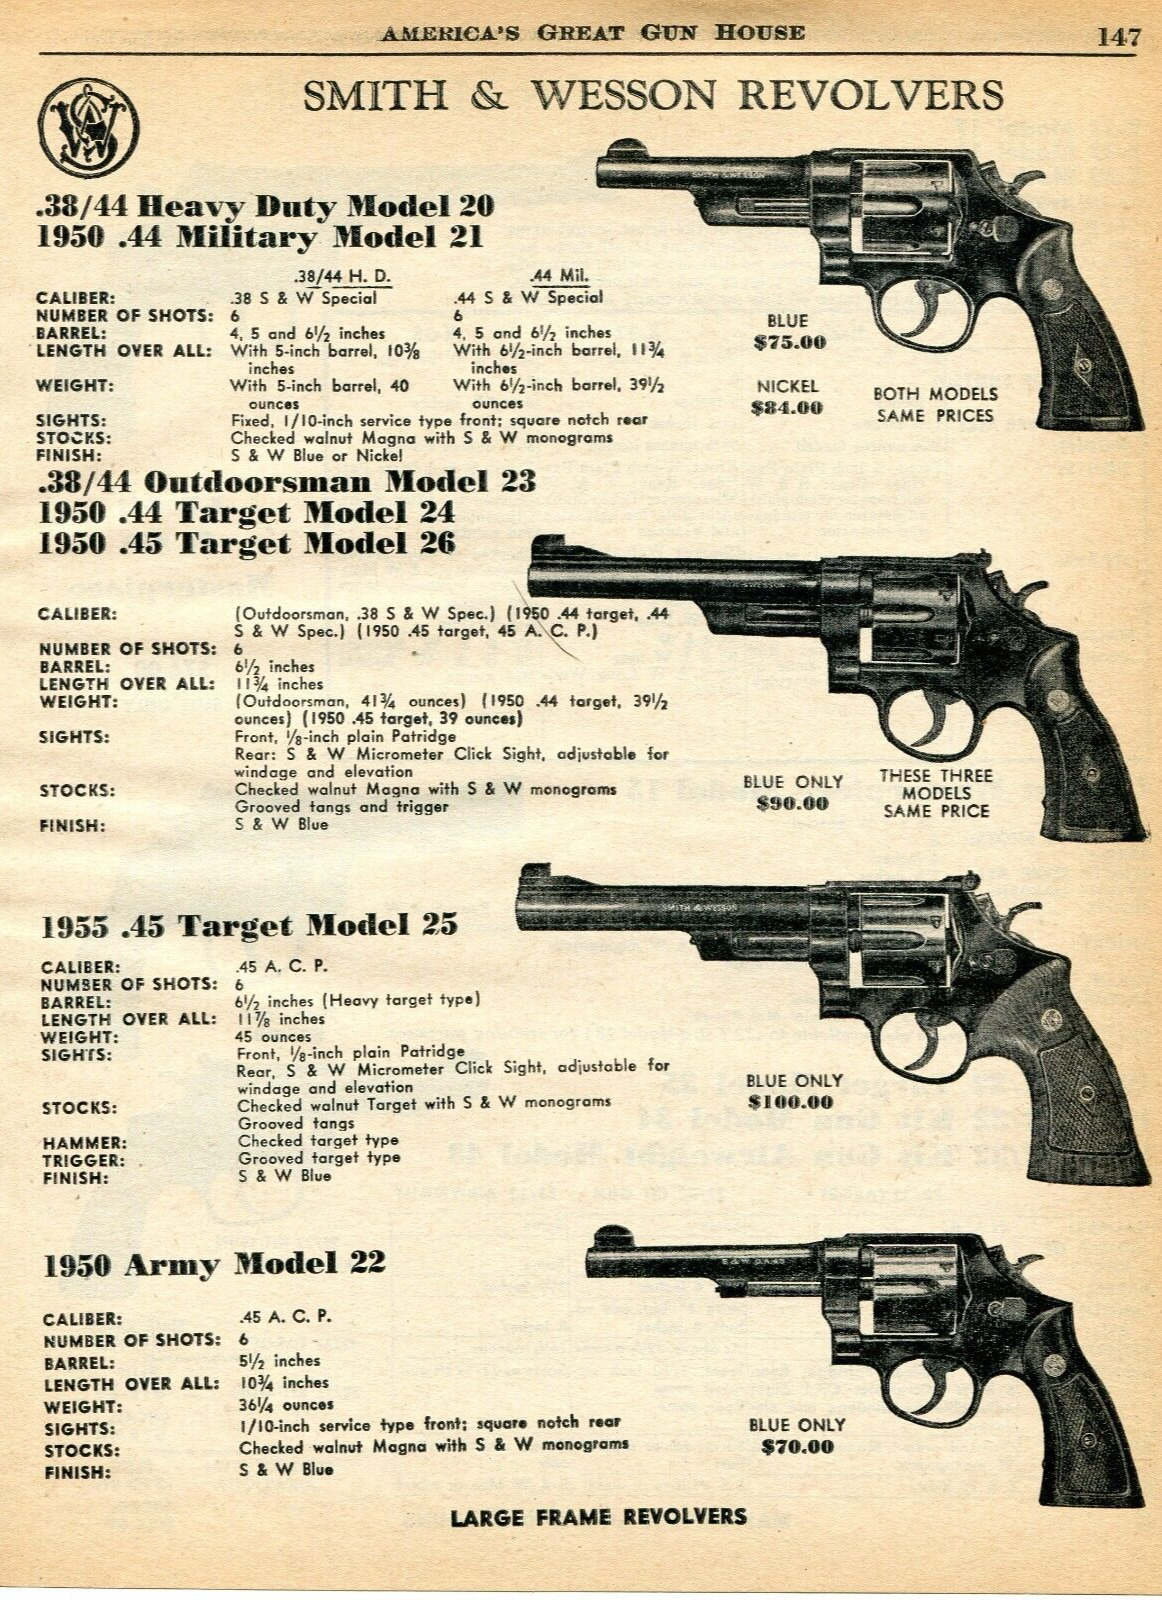 1960 Print Ad of Smith & Wesson S&W Model 20, 23, 25 1955, 22 1950 Army Revolver